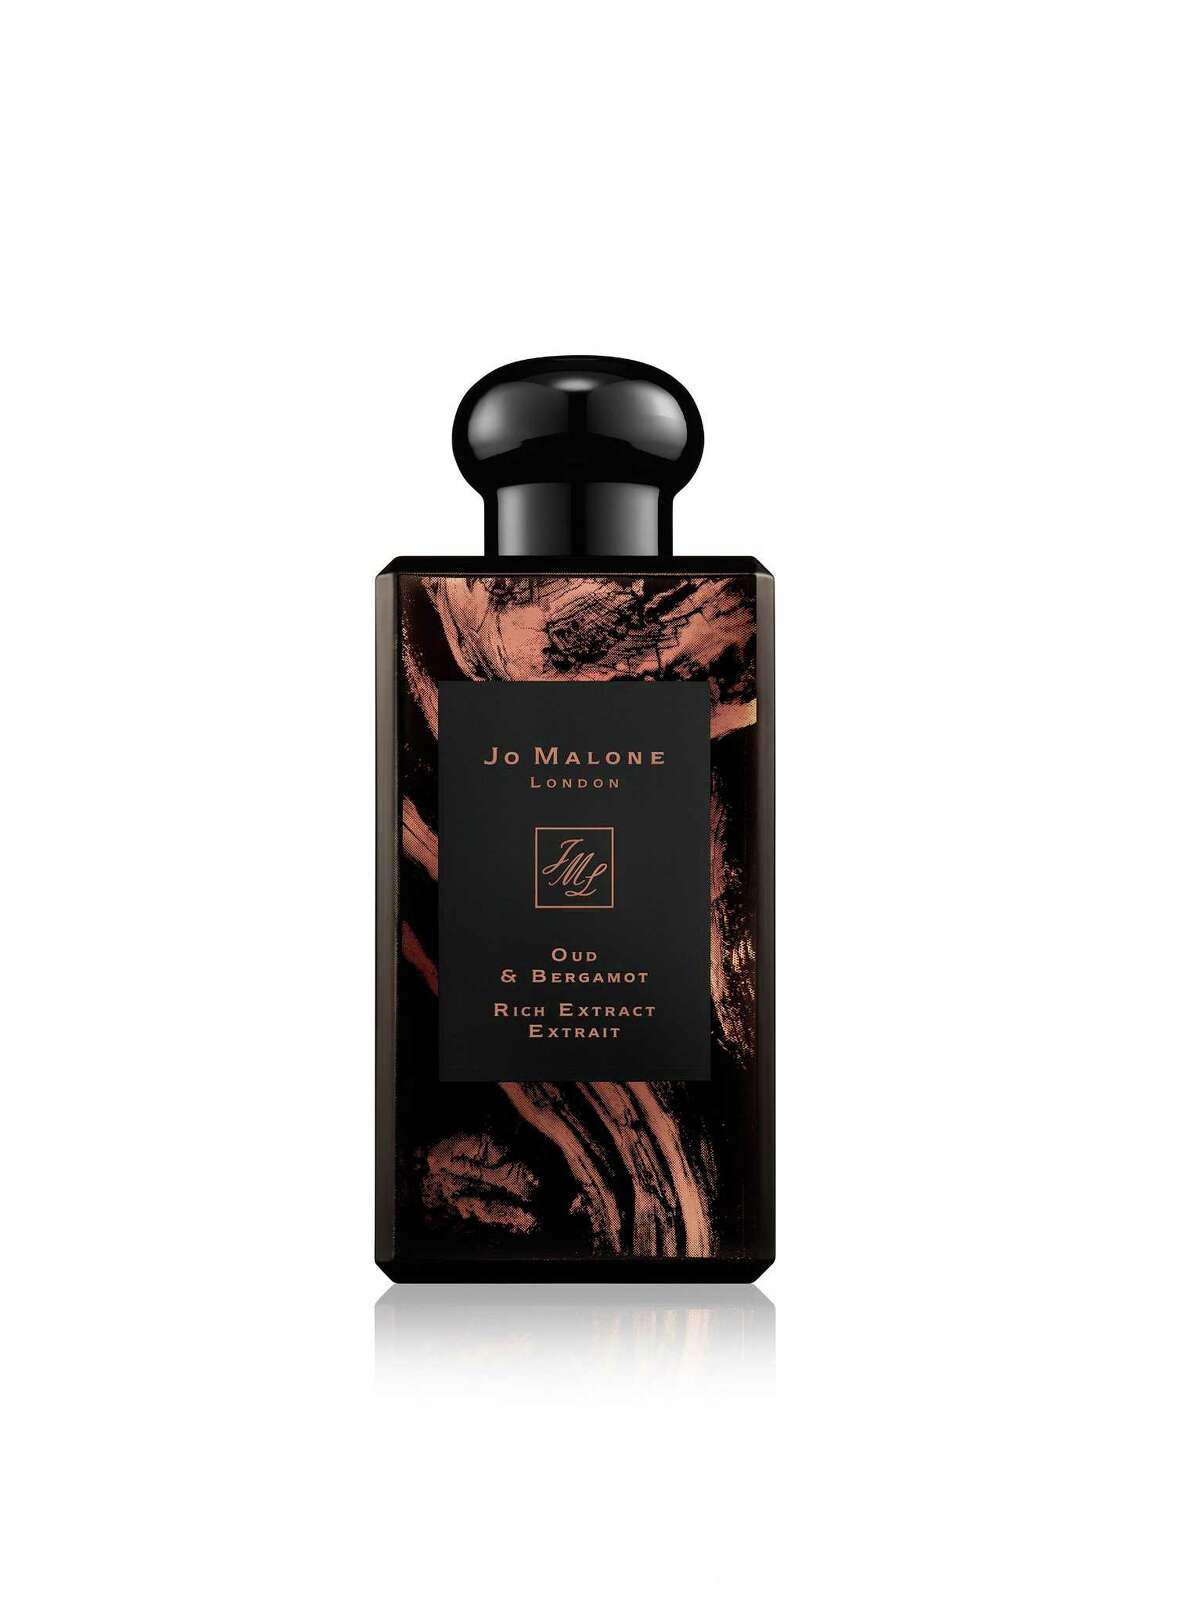 Louis Vuitton Fragrances for Father's Day